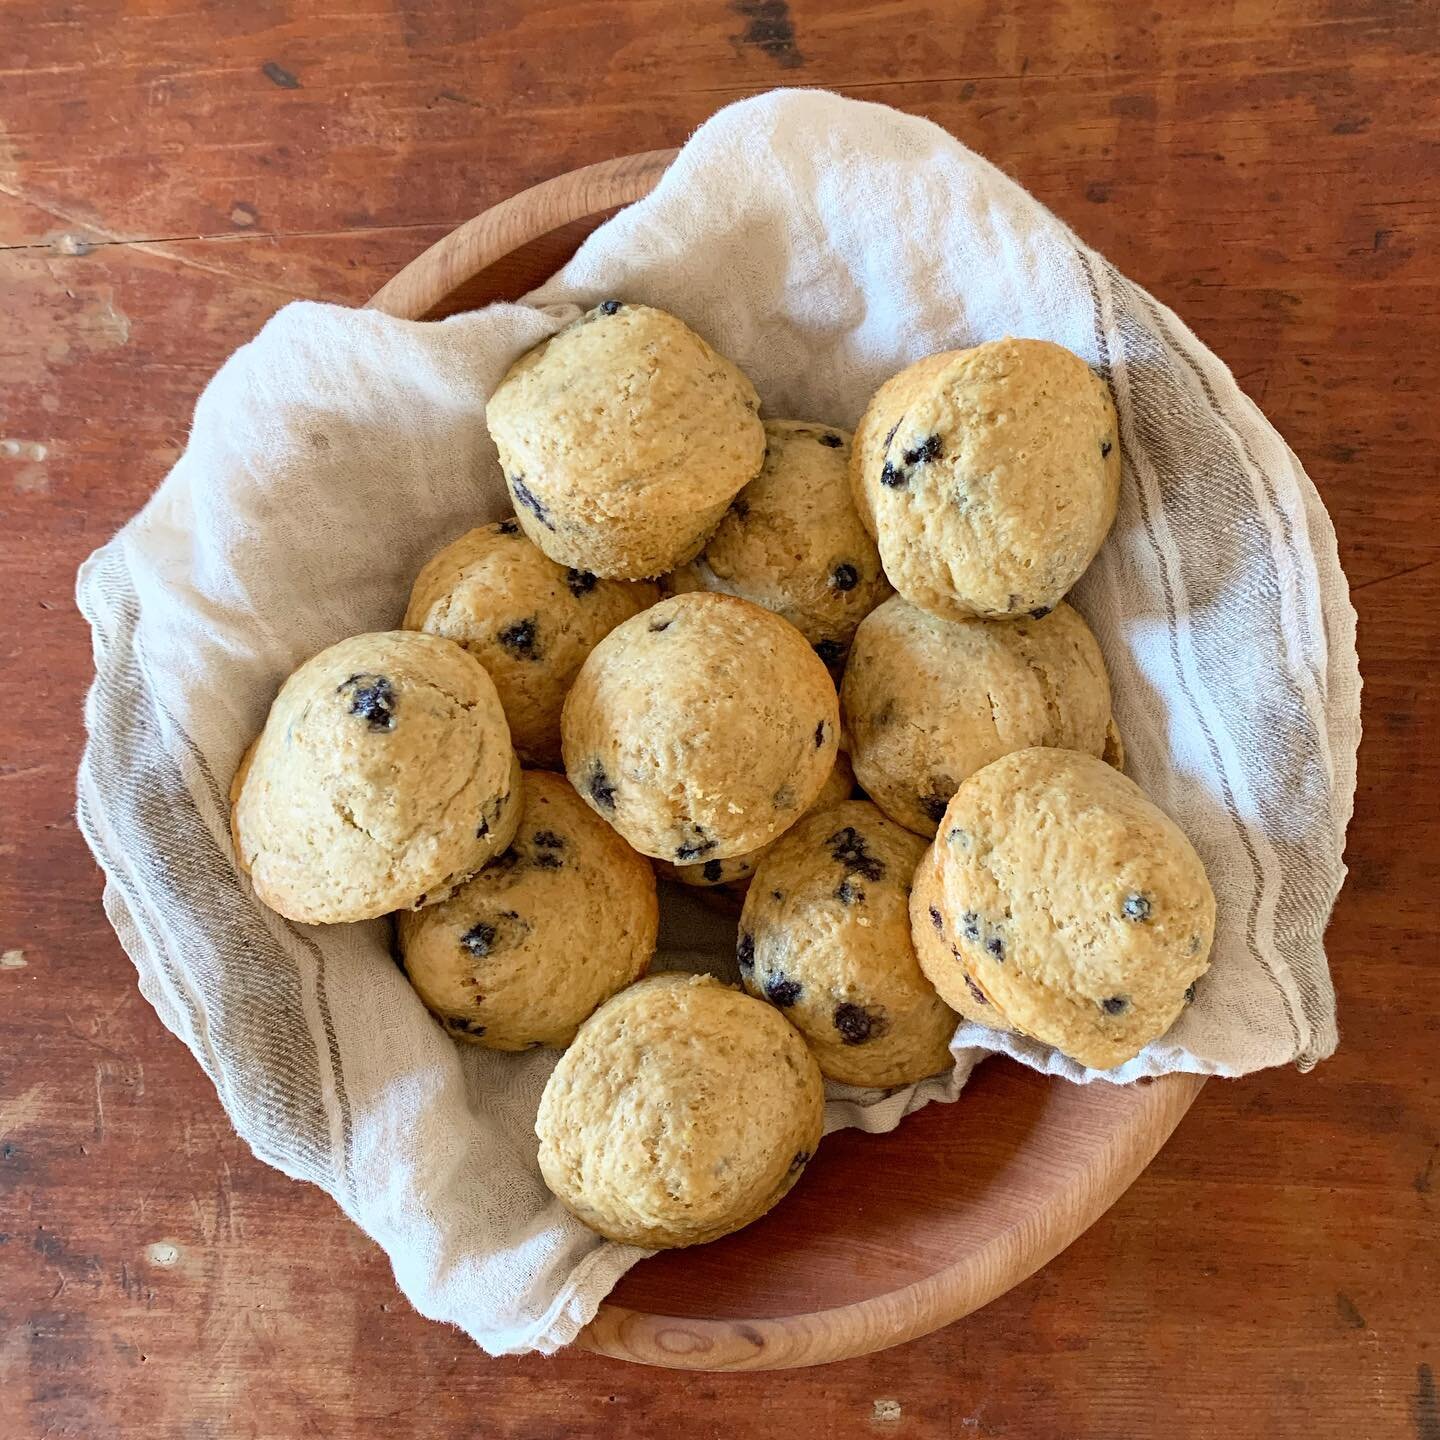 Muffin stuff&mdash; I bake a lot of muffins. Because they are an easy grab n&rsquo; go breakfast, and because they help fill the kids&rsquo; lunches. I like to sneak in ground flax and hemp seeds and other such nutritional boosts.  My current favorit